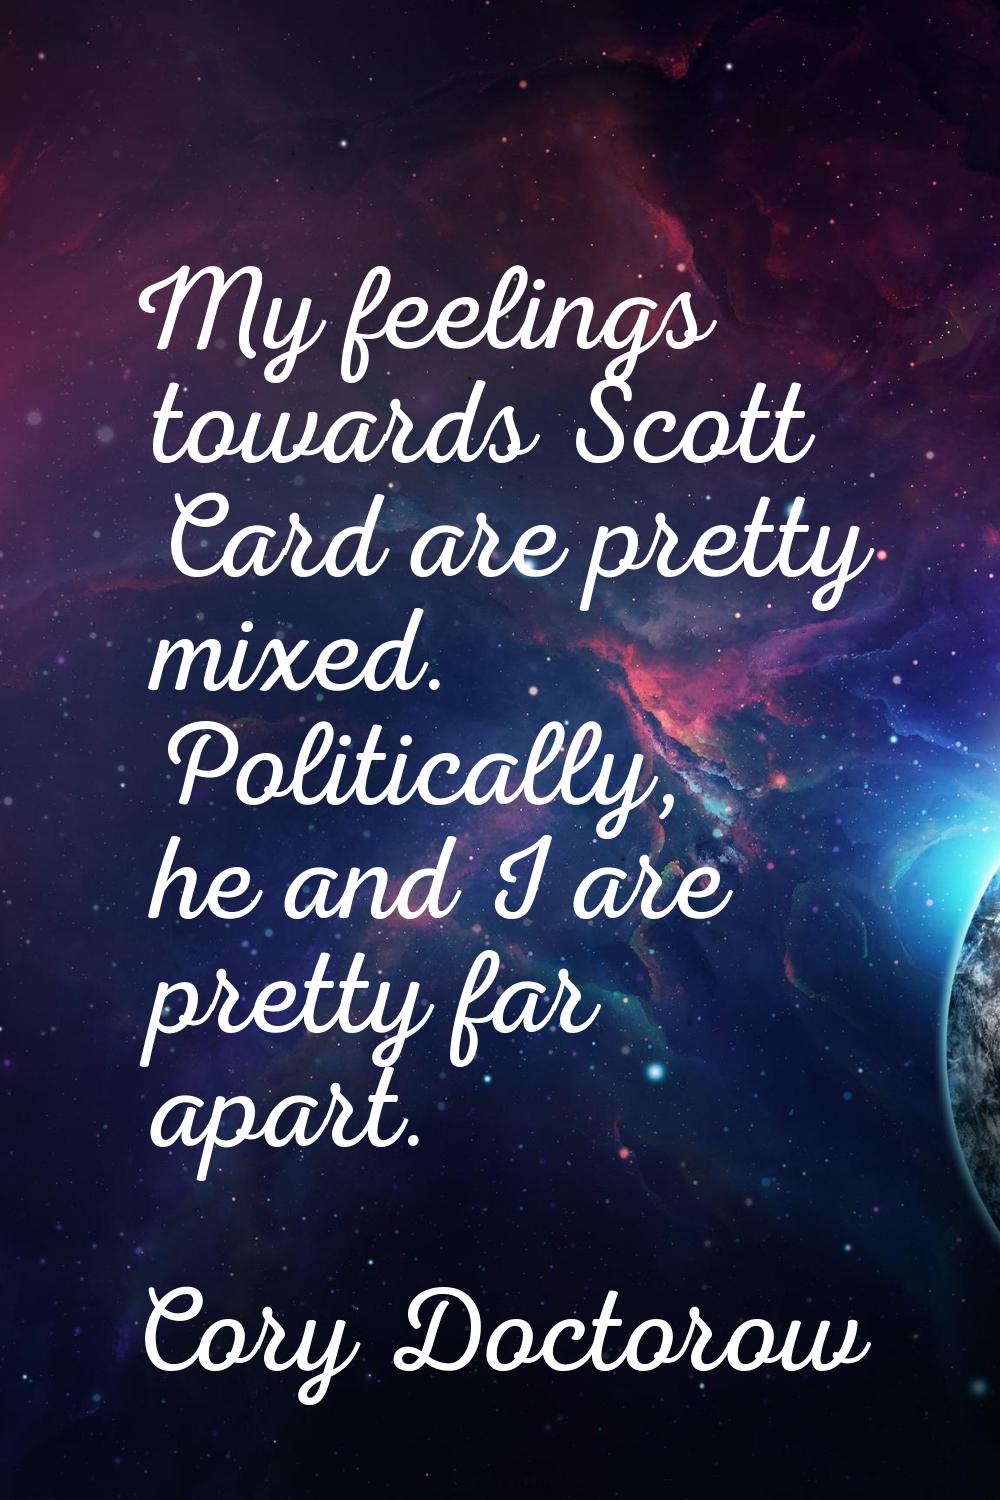 My feelings towards Scott Card are pretty mixed. Politically, he and I are pretty far apart.